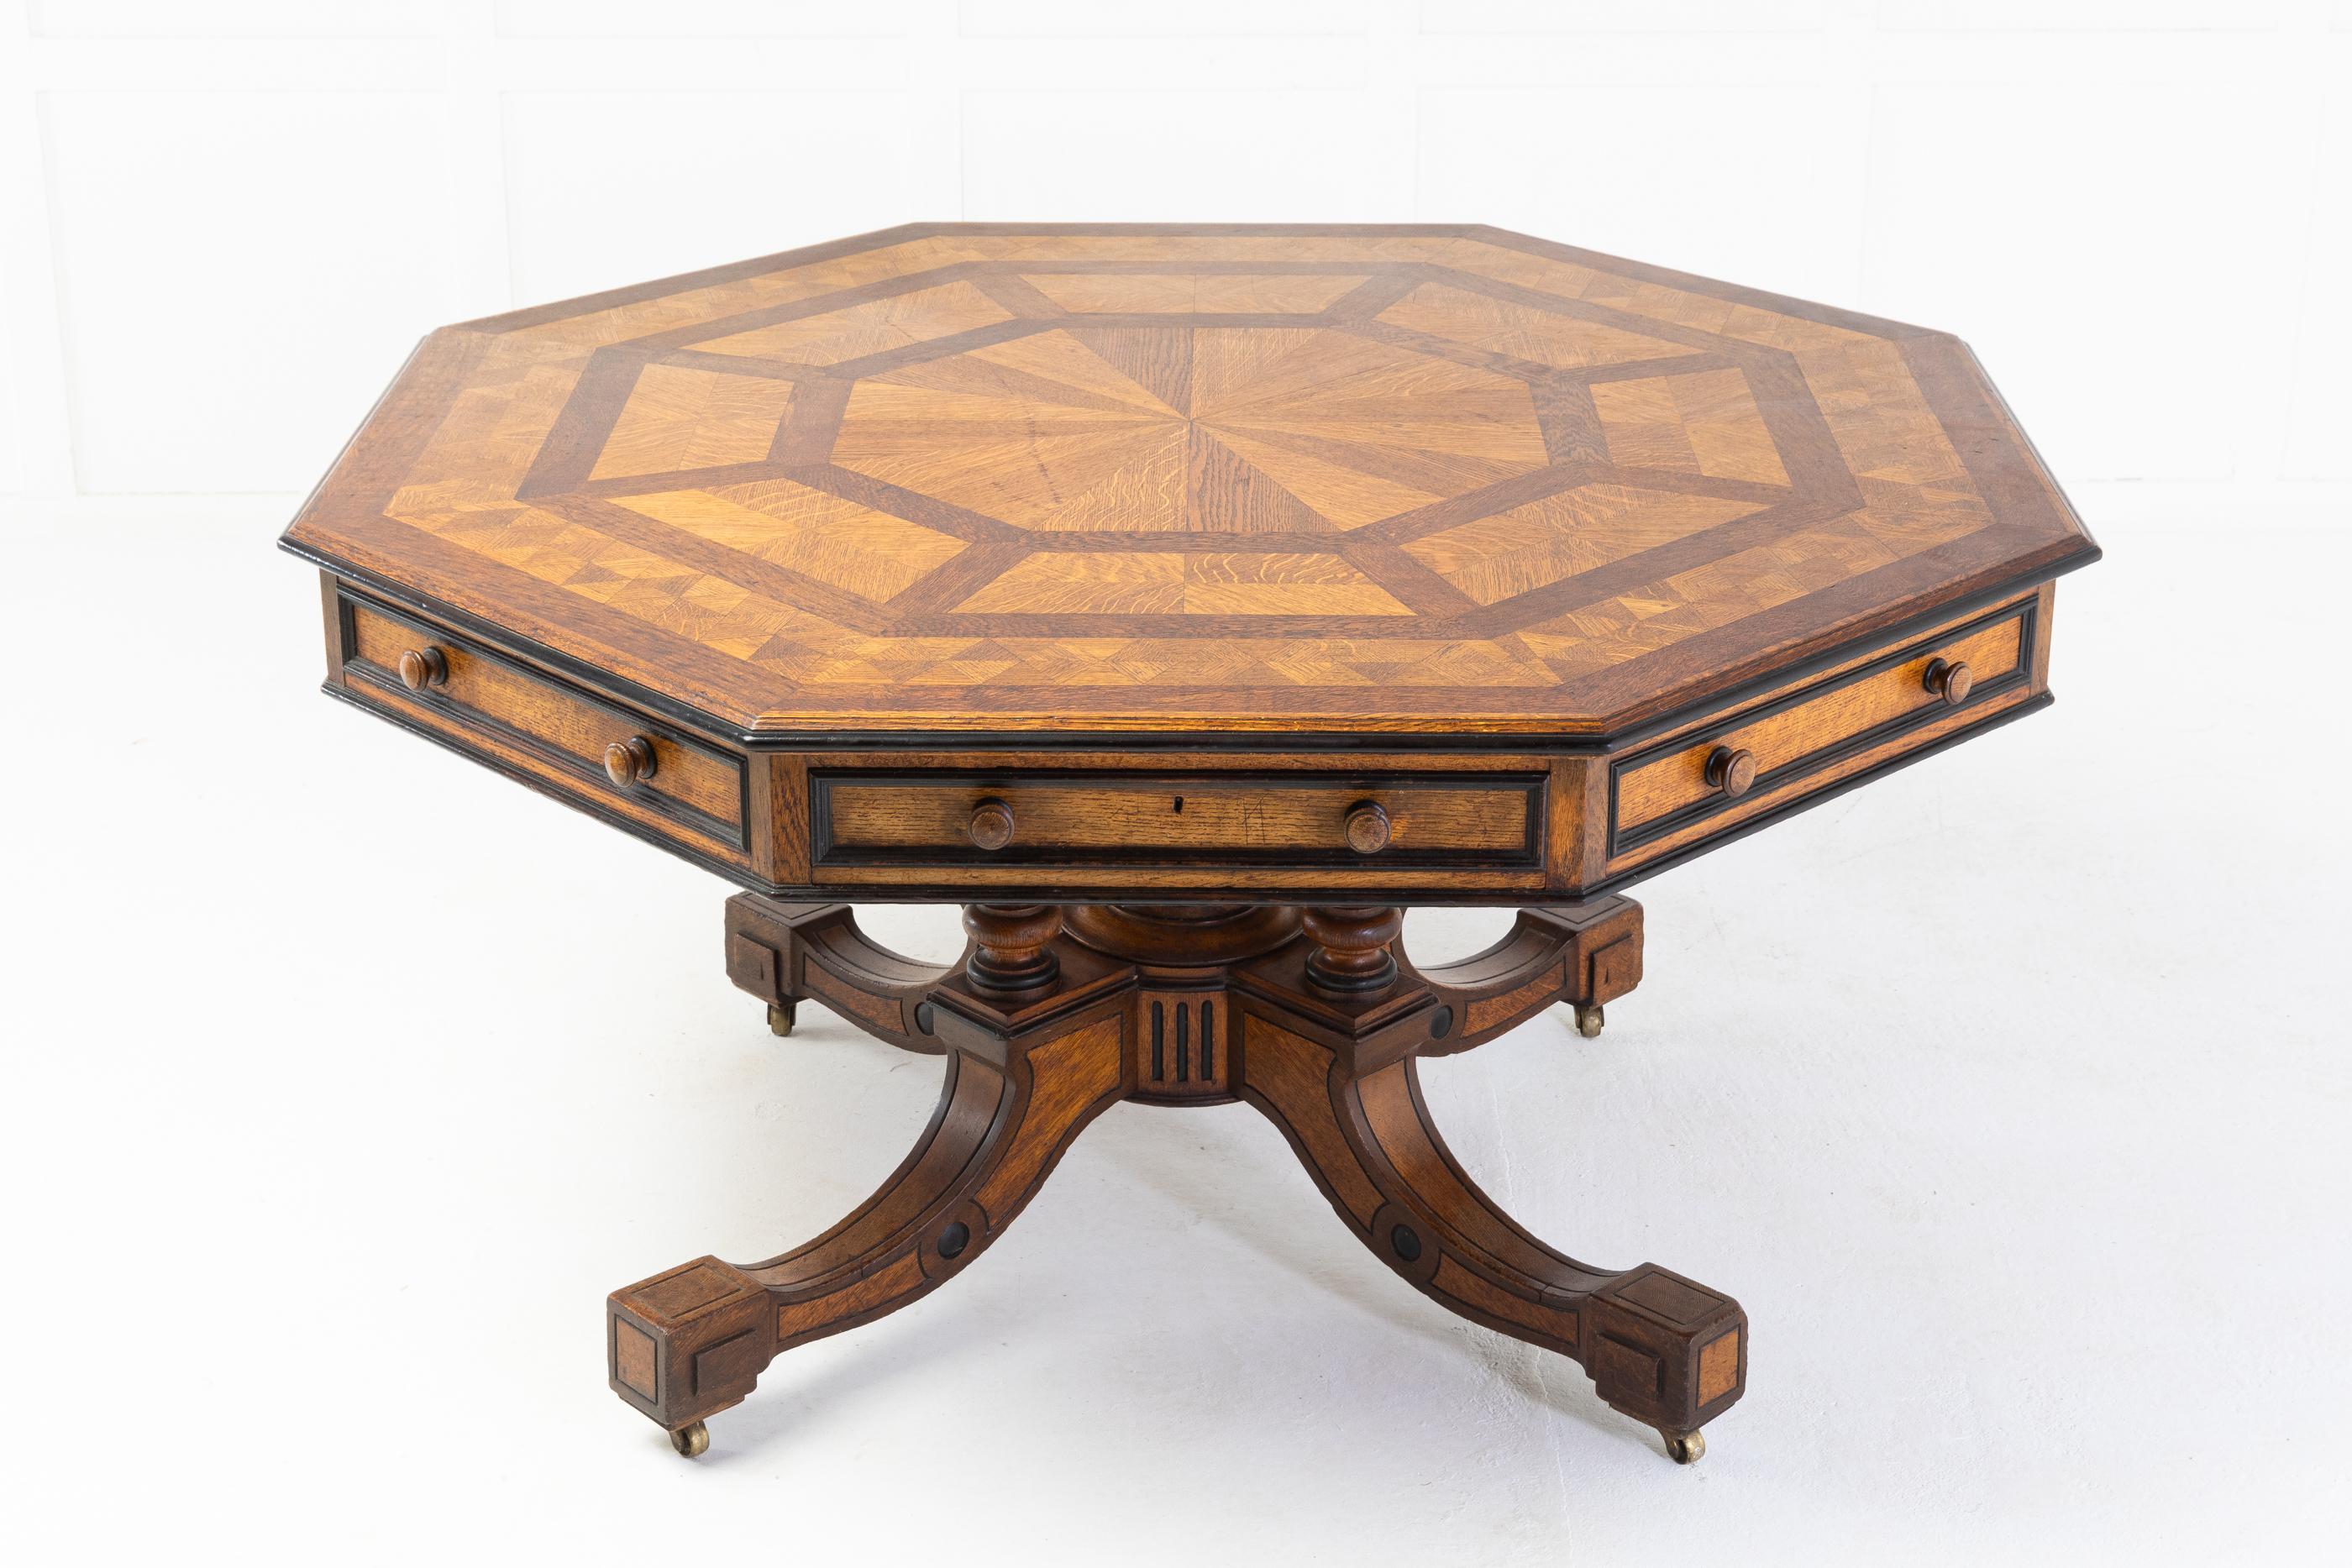 A wonderful large scale, and very elegant 19th century octagonal drum or library table by Howard and Sons. Having a wonderful parquetry top made from different shades of oak timber. Having Hobbs locks on each of the four drawers that open. Four